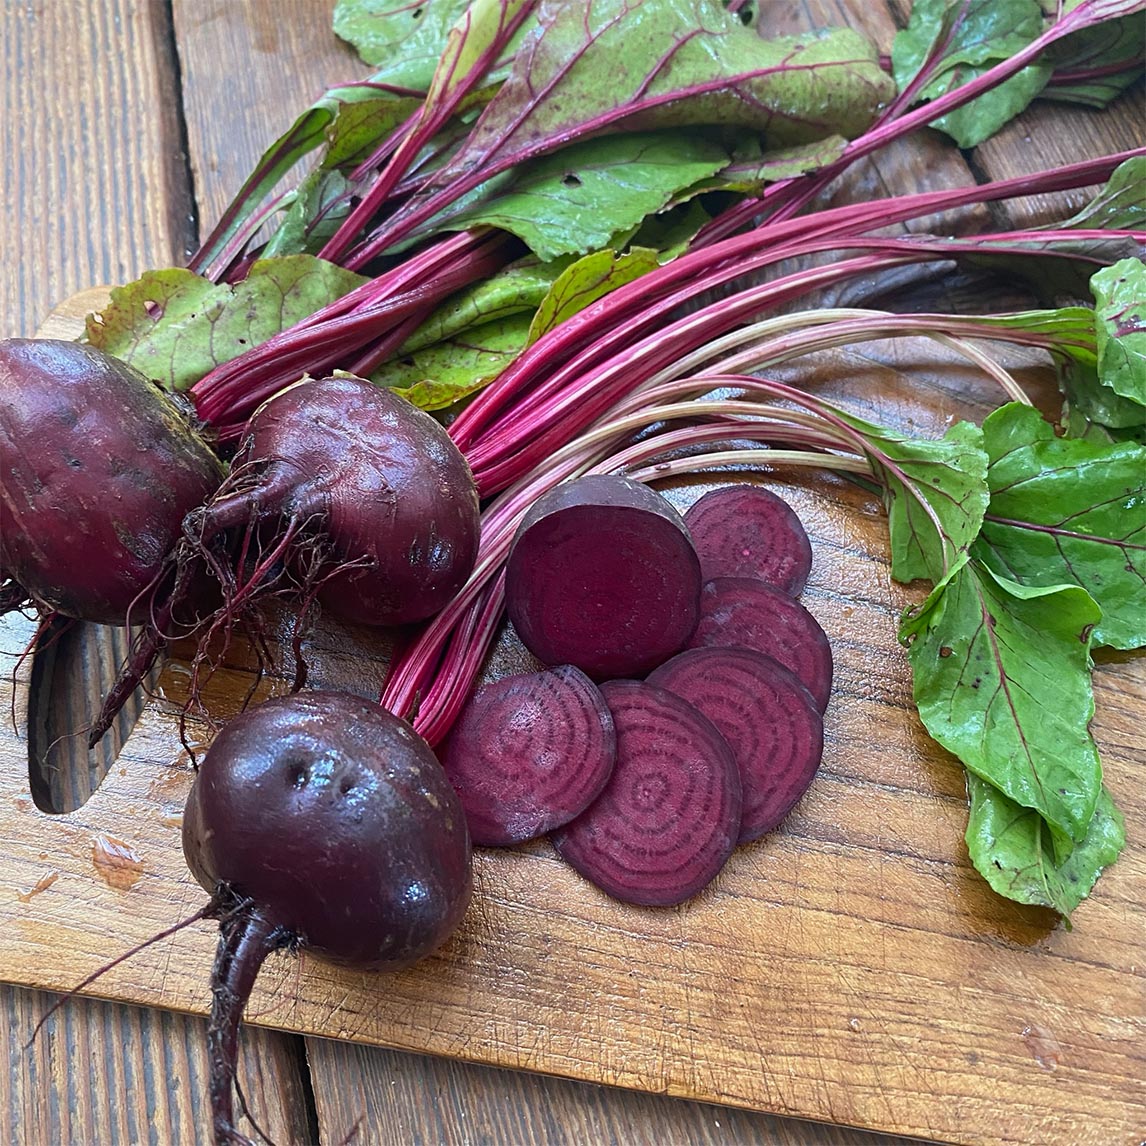 Beetroot 'Crosby's Egyptian'